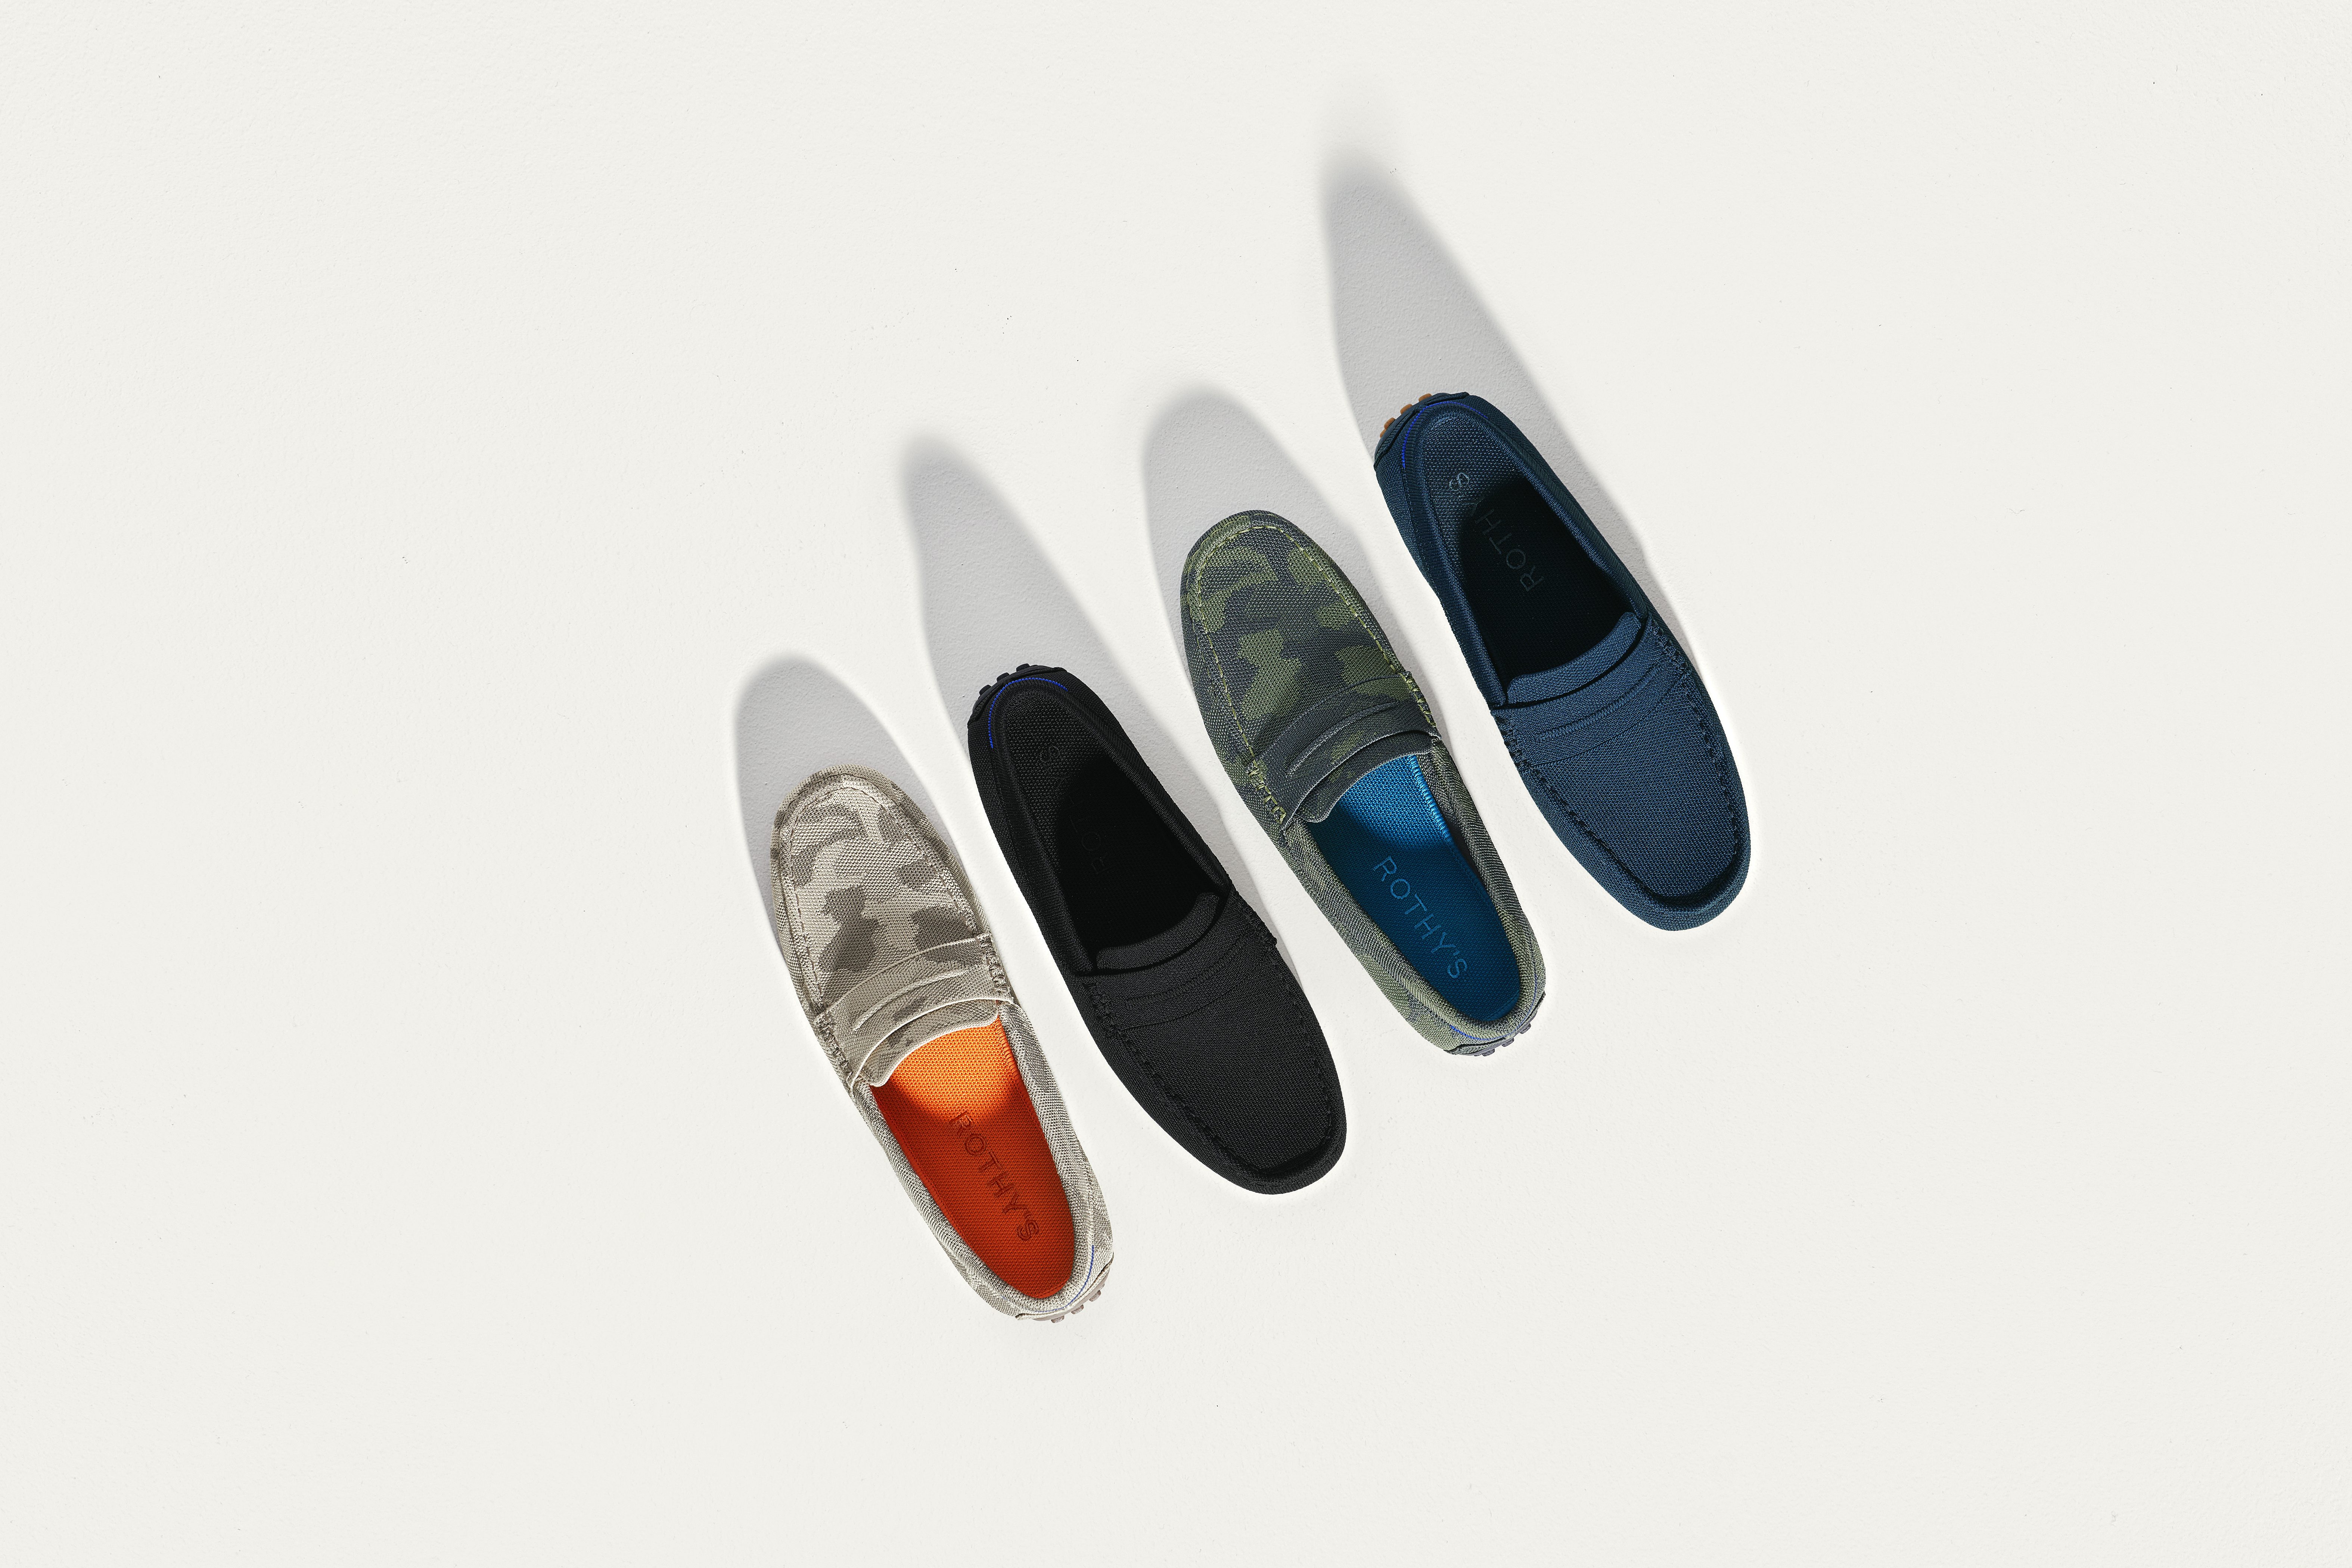 Rothy's loafers are made from recycled plastic bottles. Rothy's